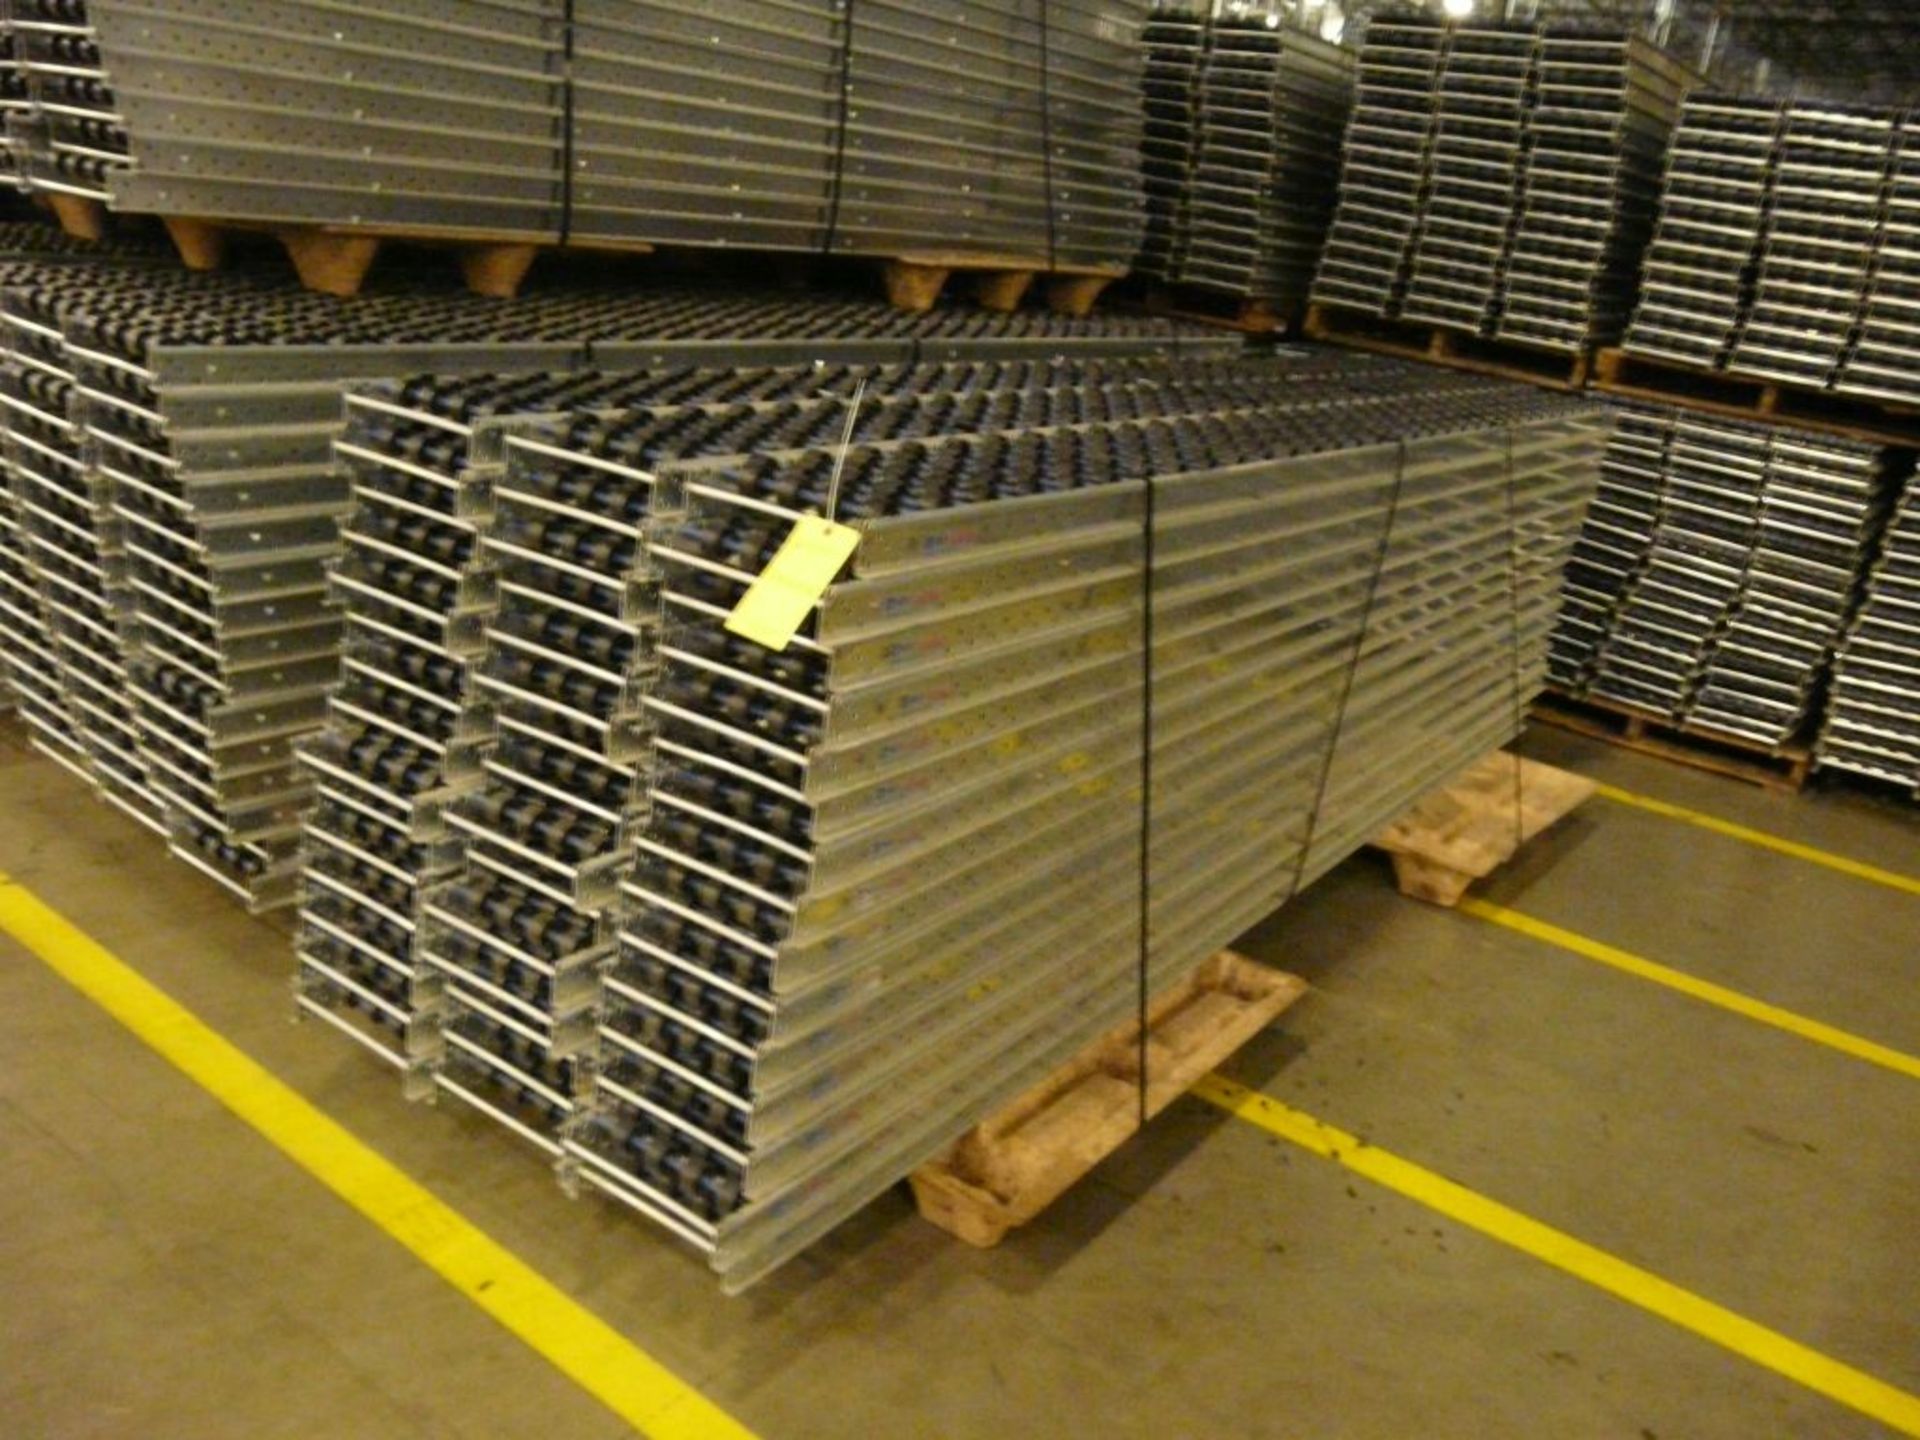 Lot of (90) SpanTrack Wheelbed Carton Flow Conveyors - 11.5'L x 11"W; Tag: 223577 - $30 Lot